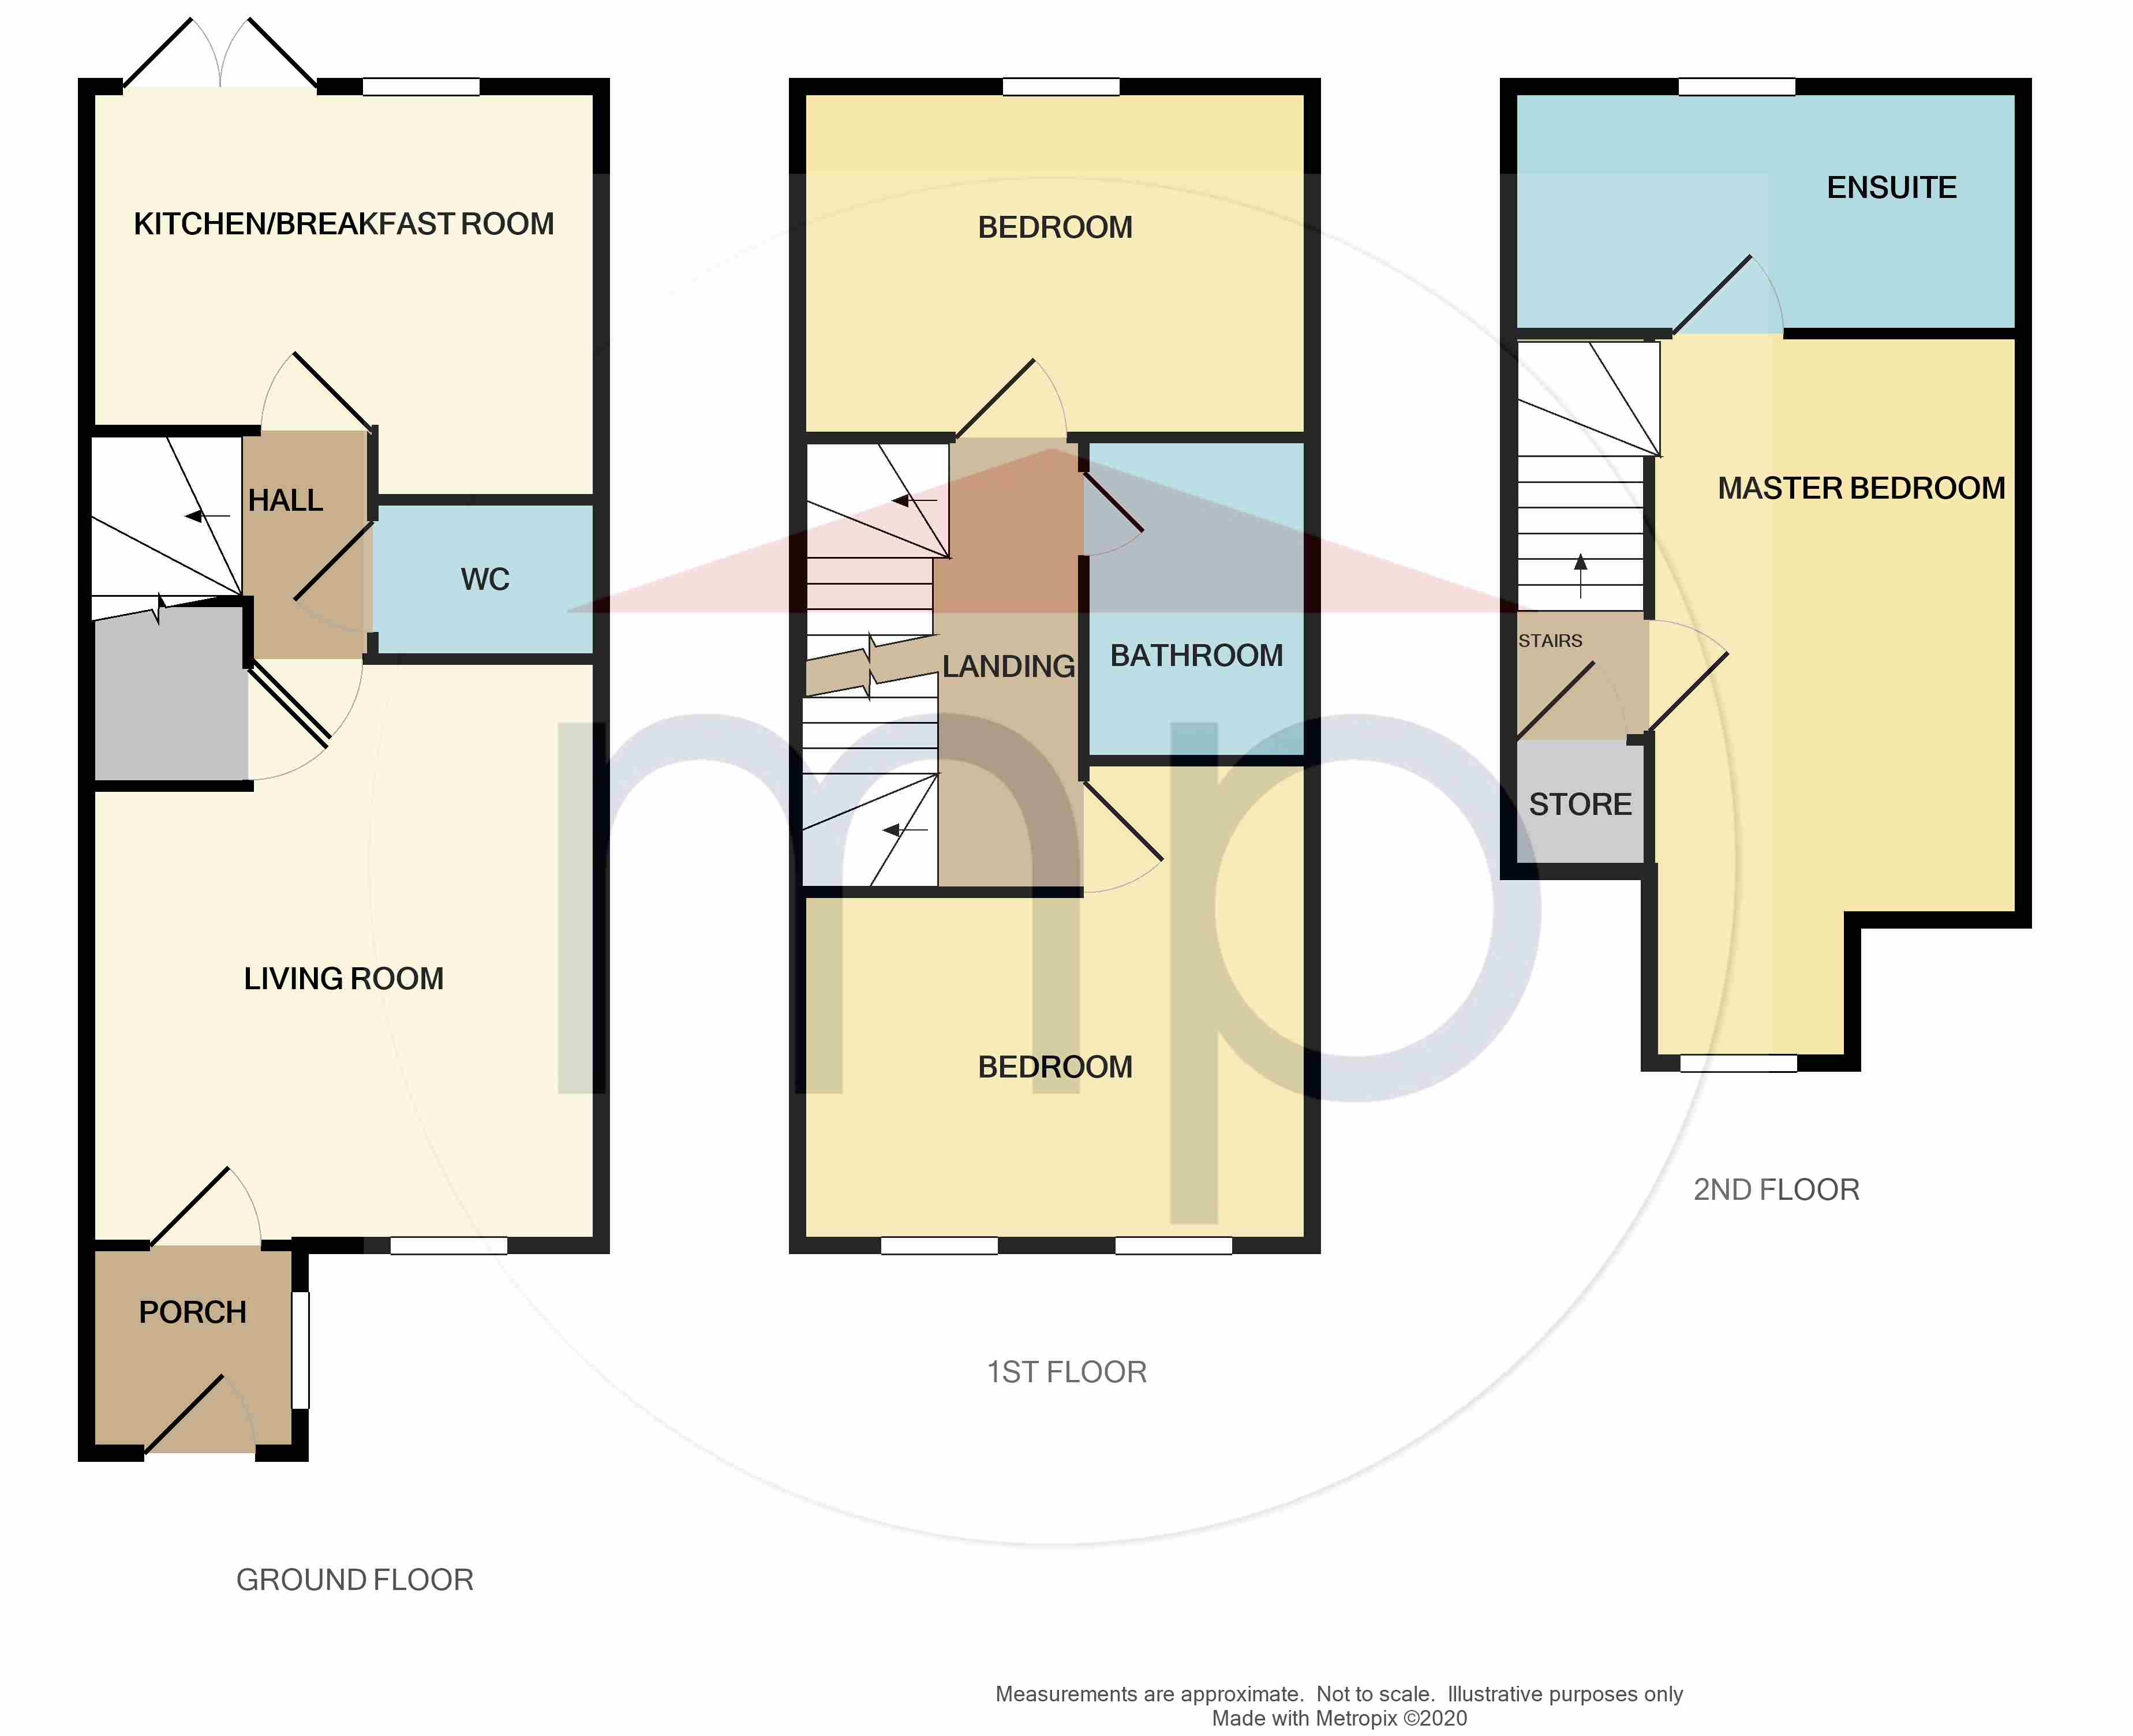 3 bed house to rent in Witton Park, Stockton-on-Tees - Property floorplan